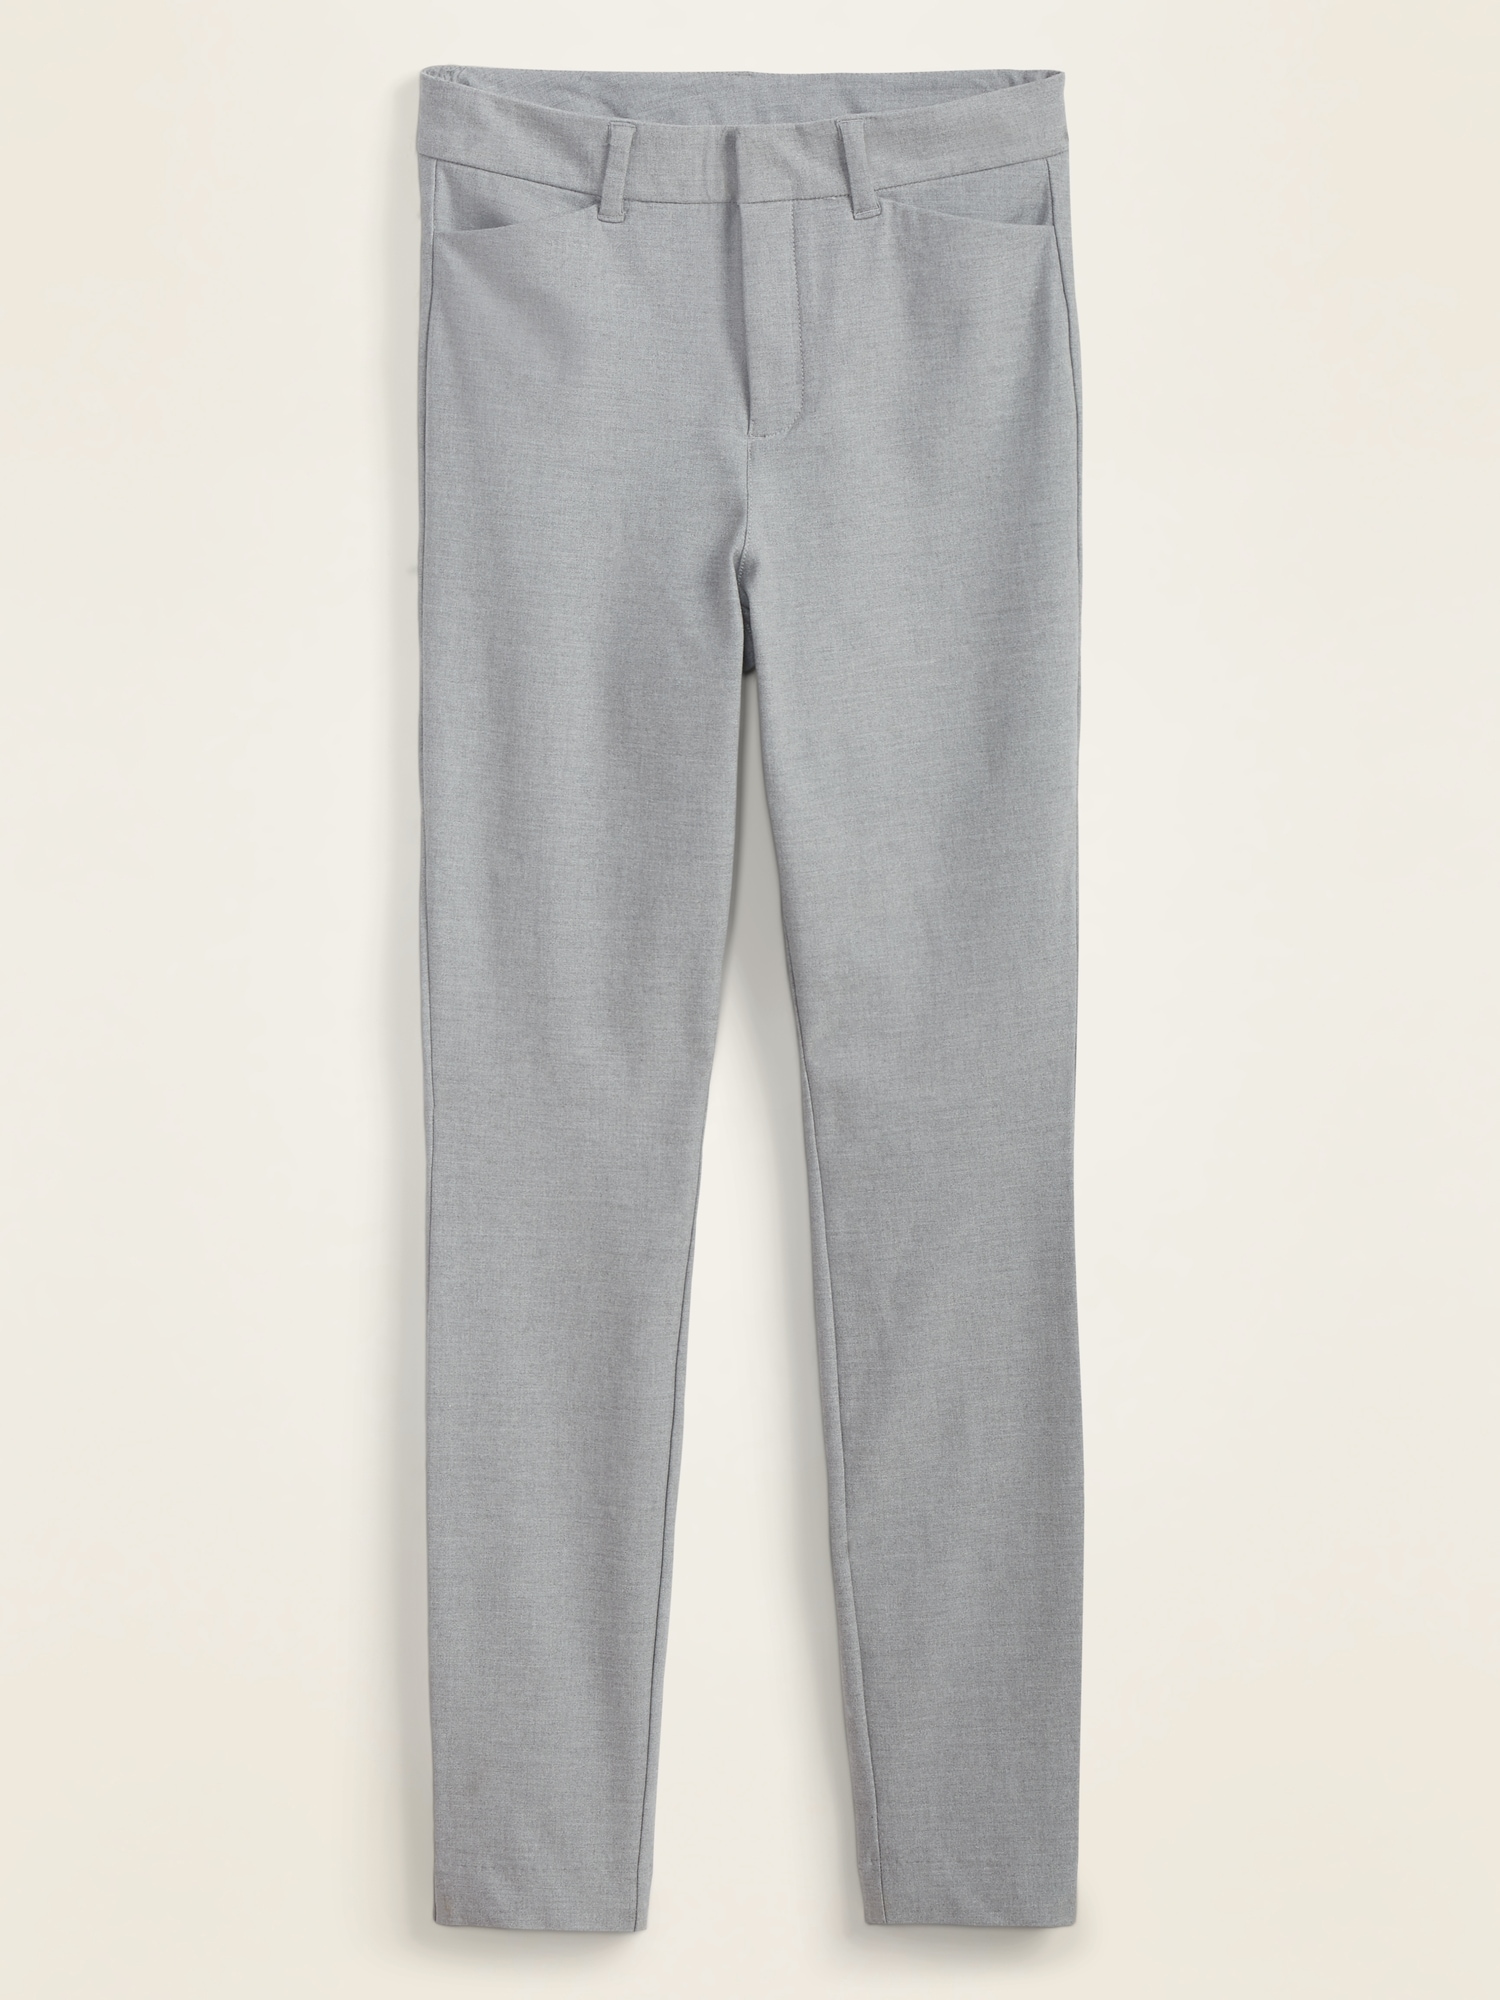 old navy women's casual pants